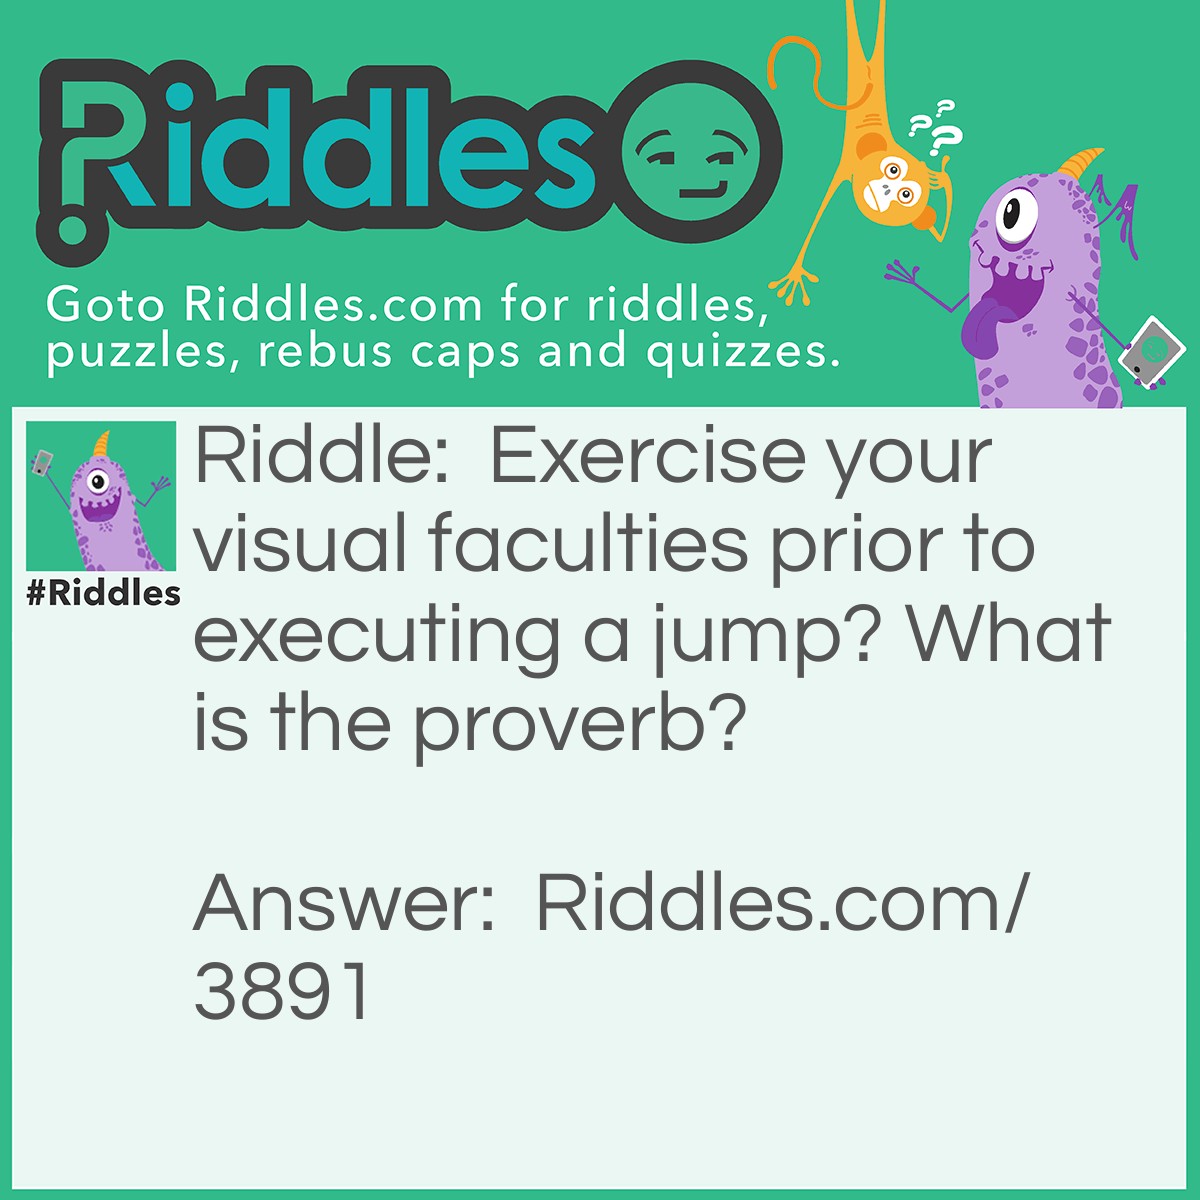 Riddle: Exercise your visual faculties prior to executing a jump. What is the proverb? Answer: Look before you leap.